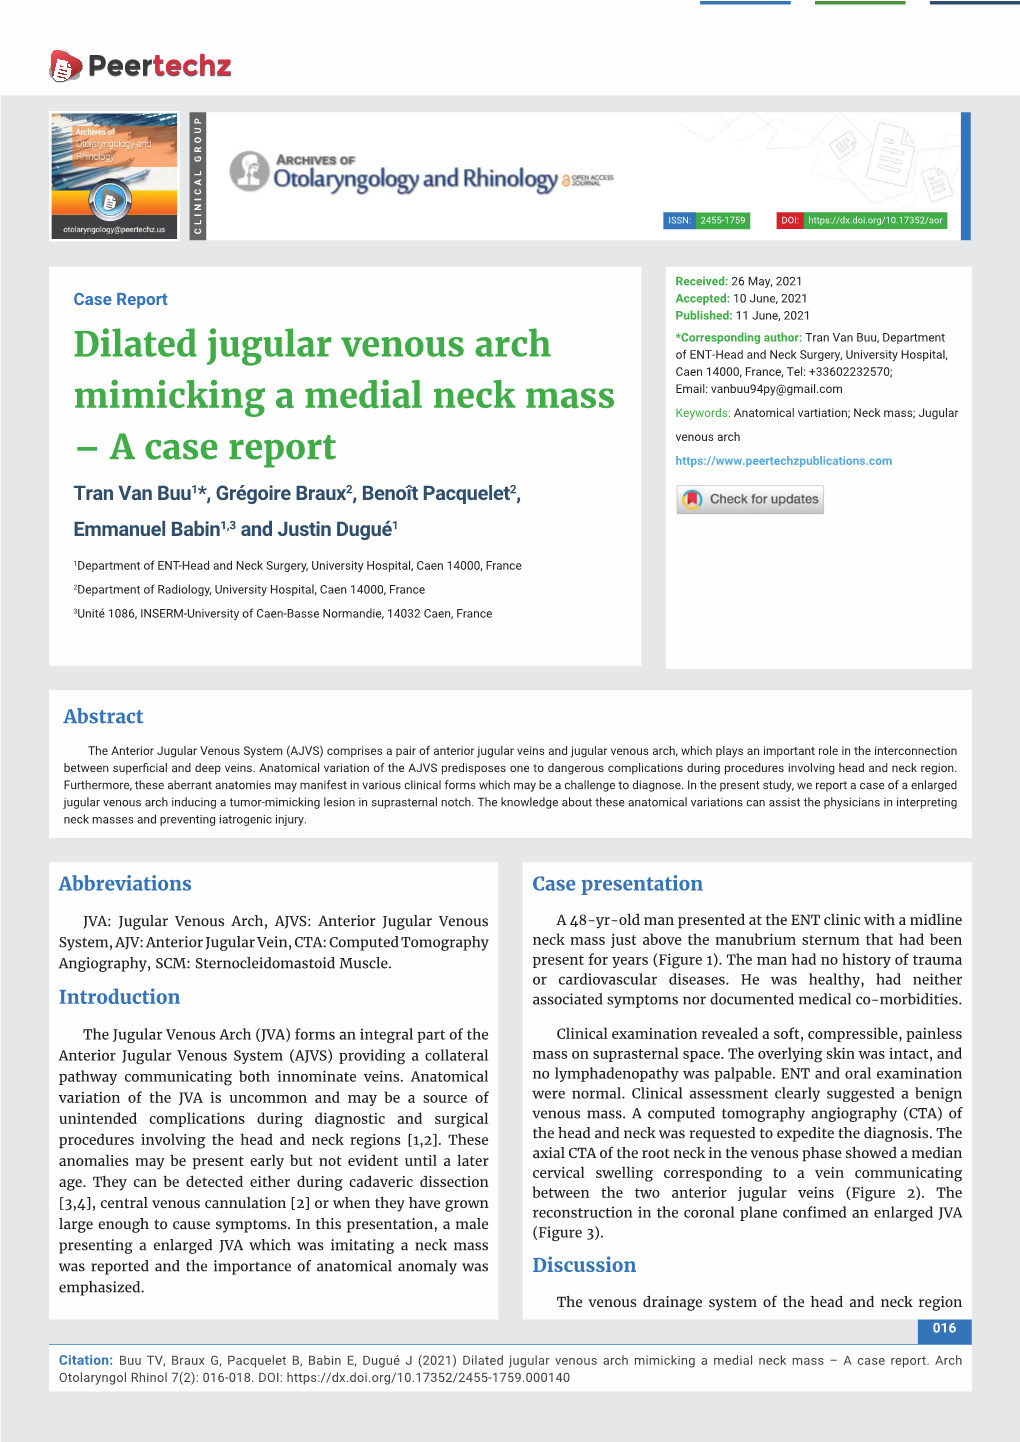 Dilated Jugular Venous Arch Mimicking a Medial Neck Mass – a Case Report